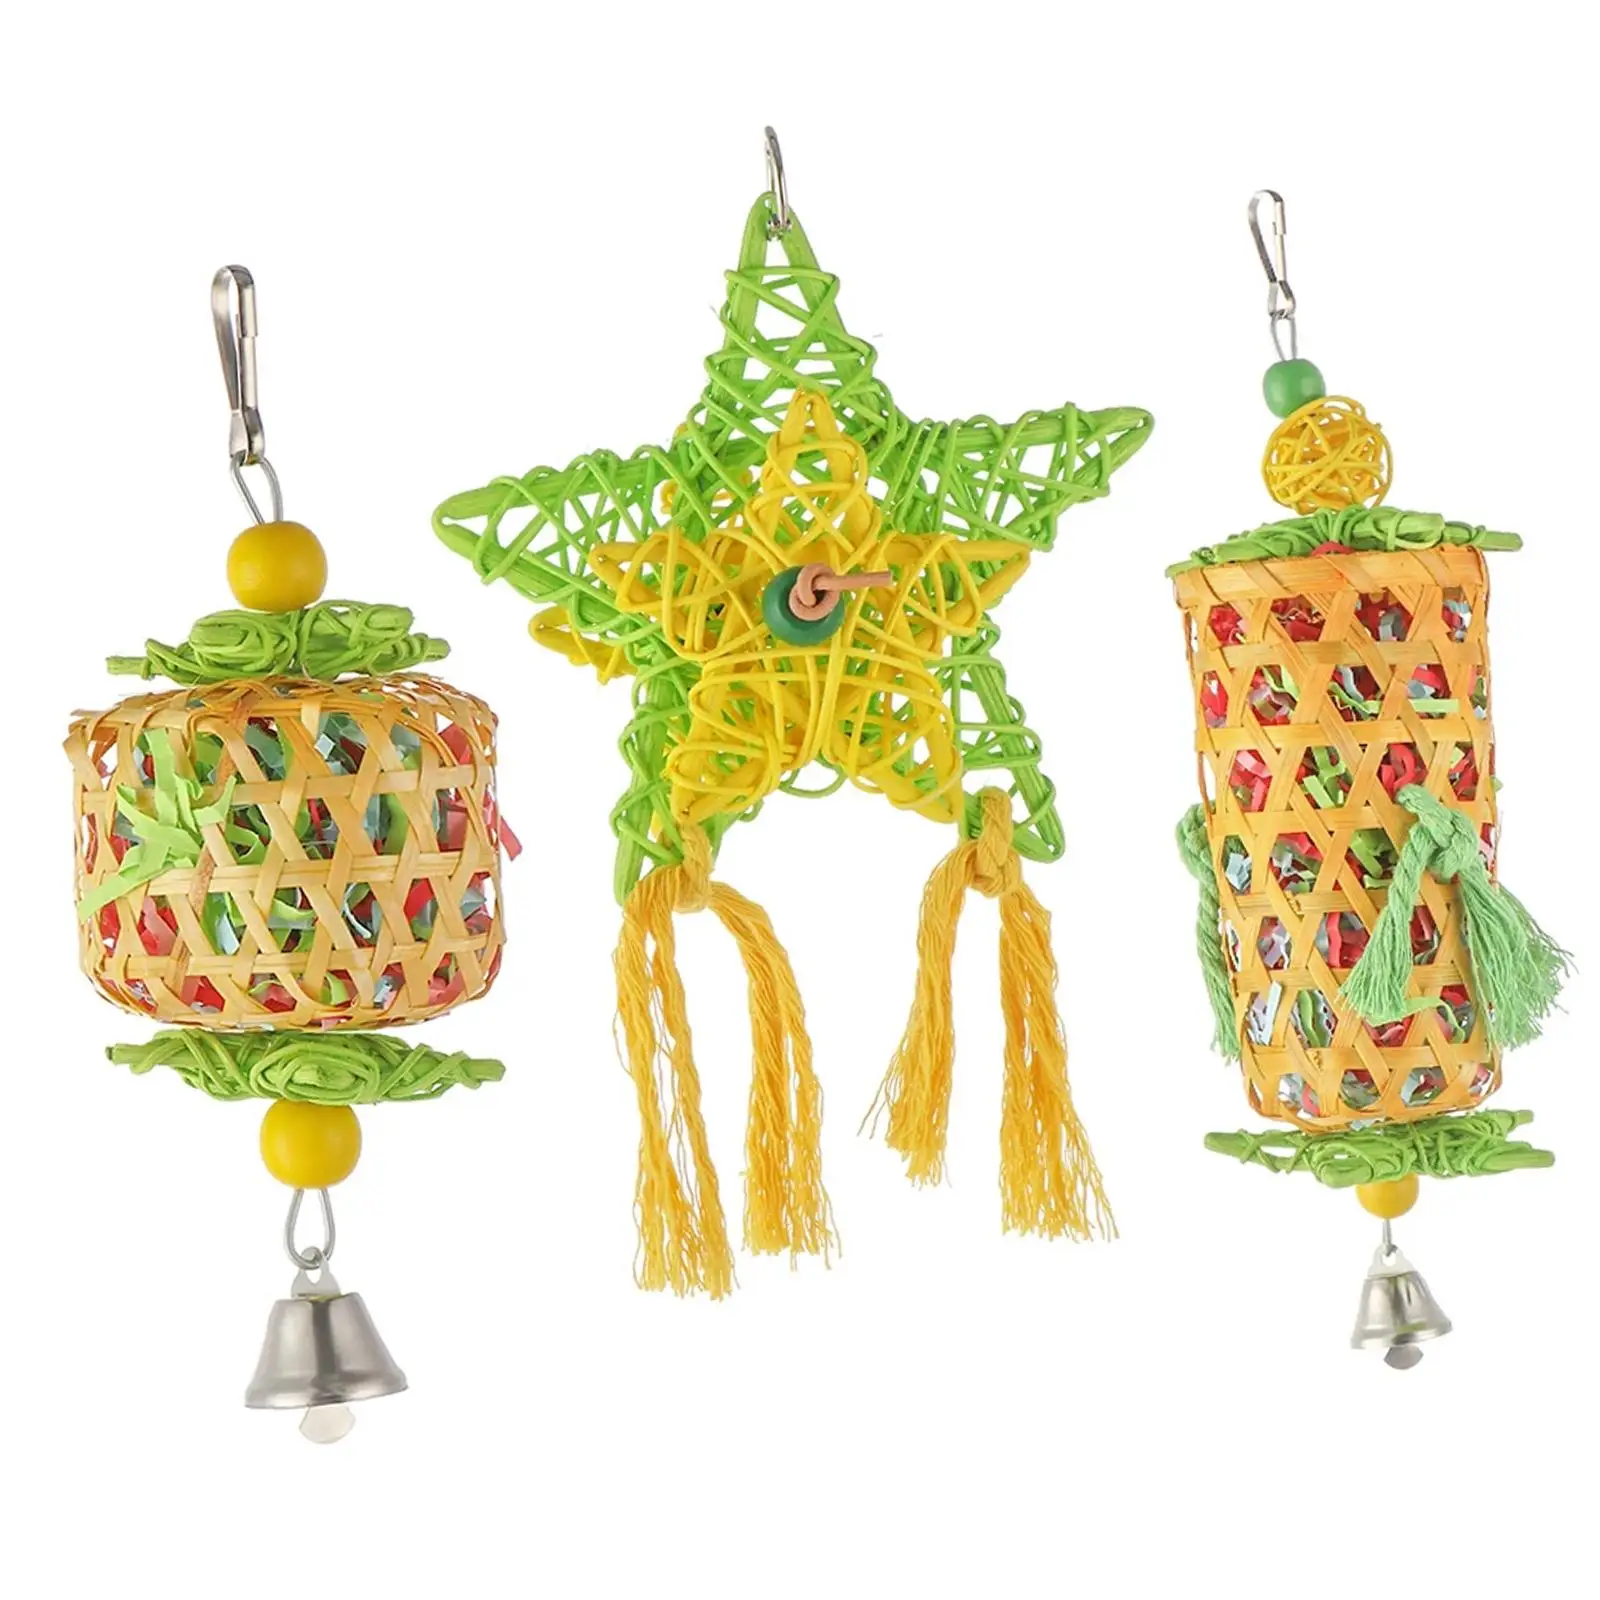 3Pcs Parrot Toys Hanging Swing Cage Bird Chewing Toy for Budgie Finches